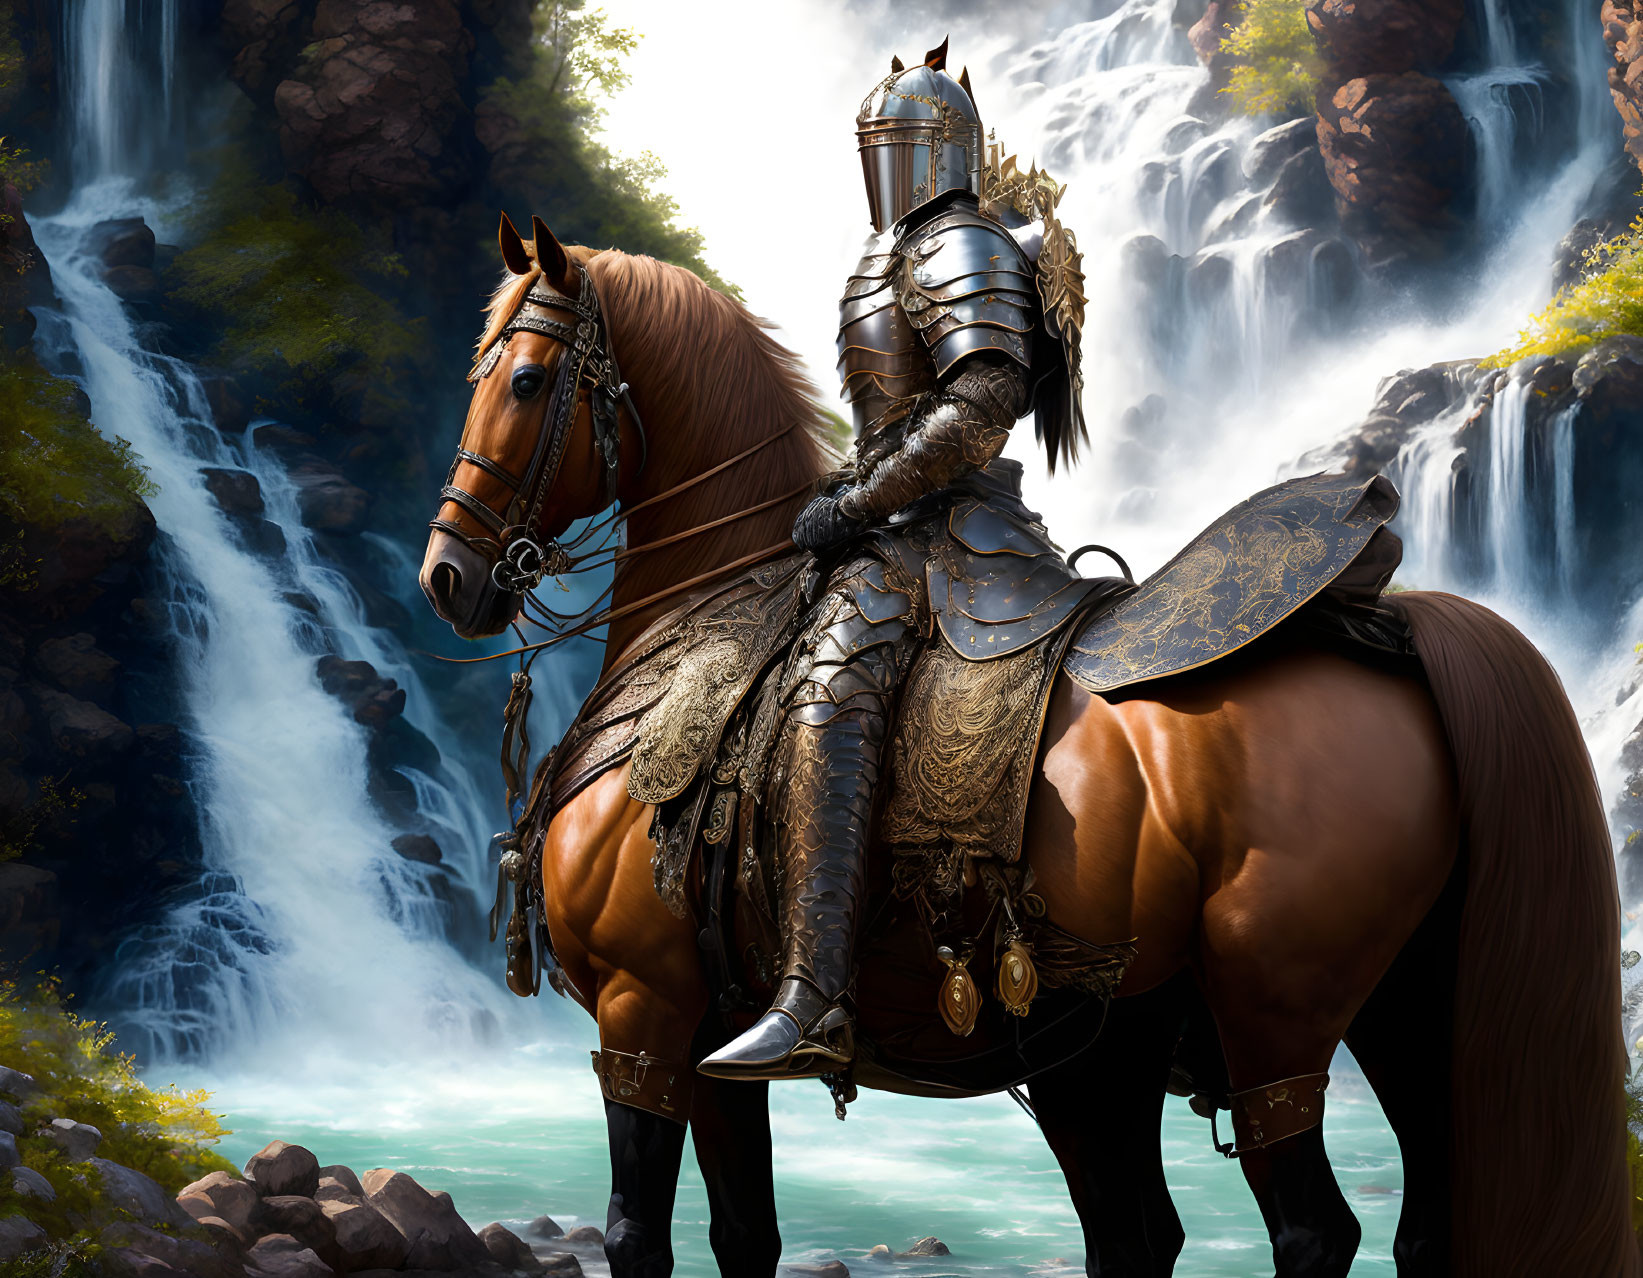 Knight in ornate armor on brown horse at majestic waterfall surrounded by lush greenery